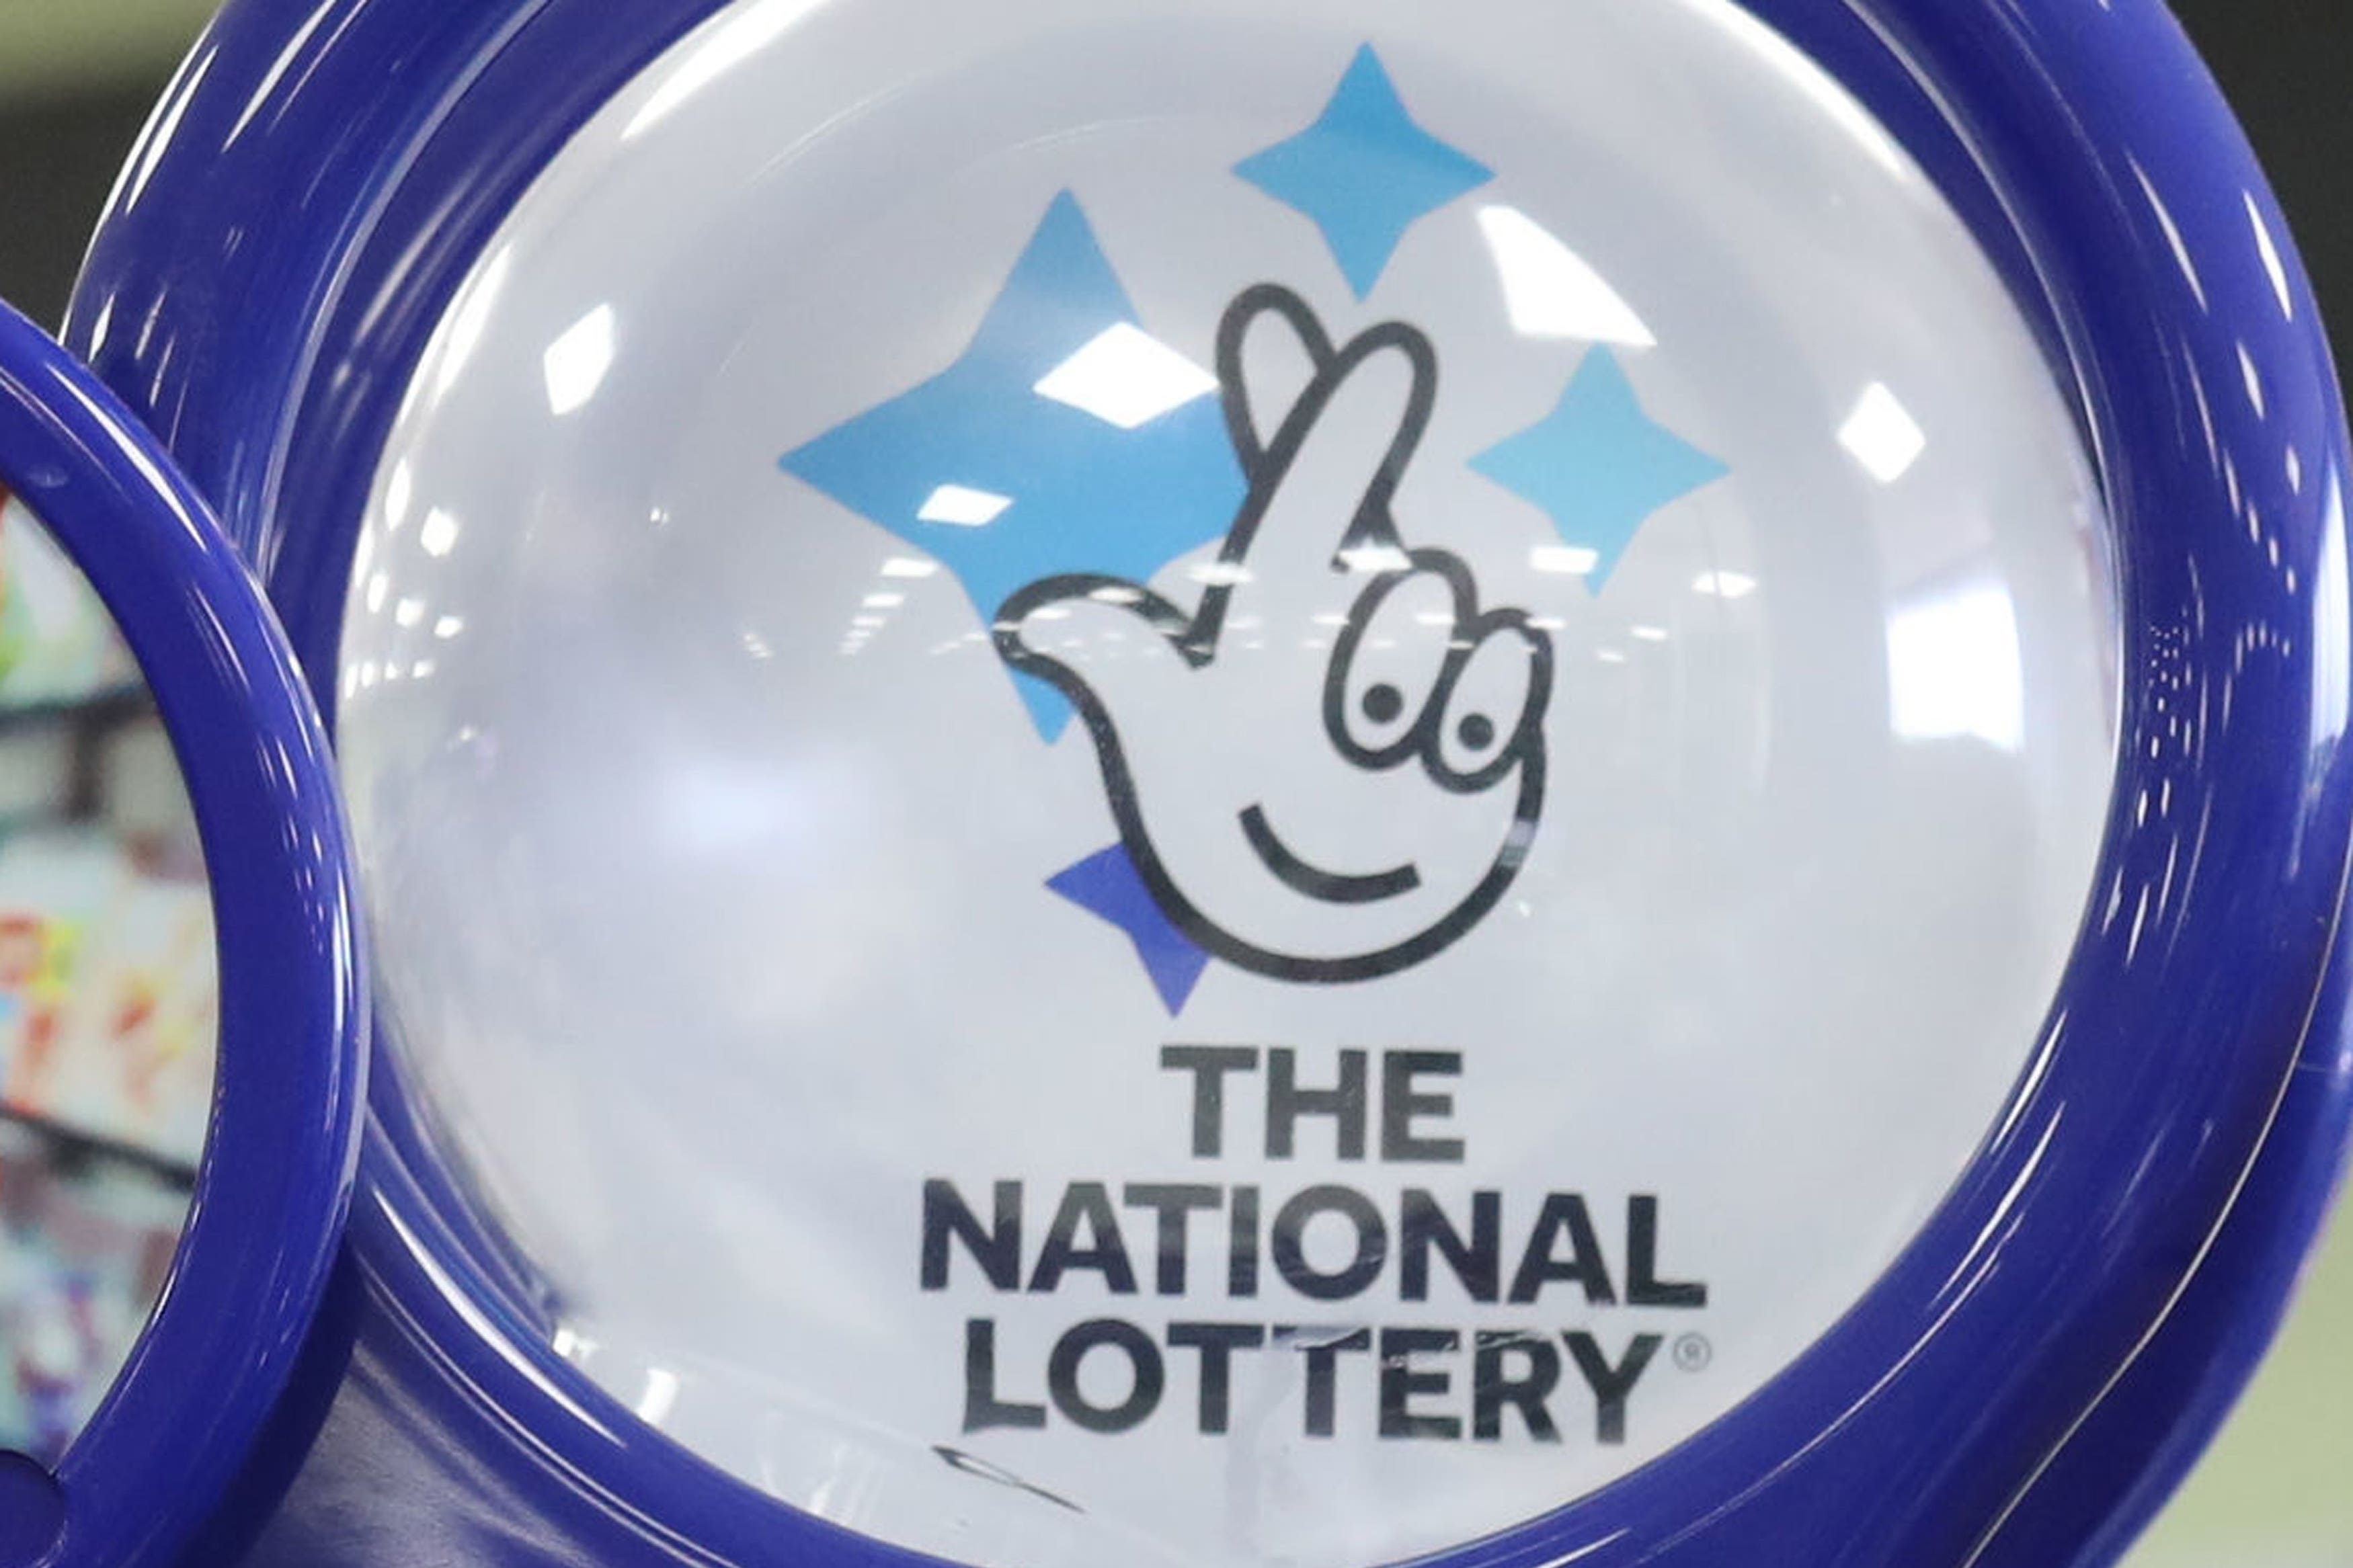 A lucky winner has scooped the £15m jackpot just before Christmas